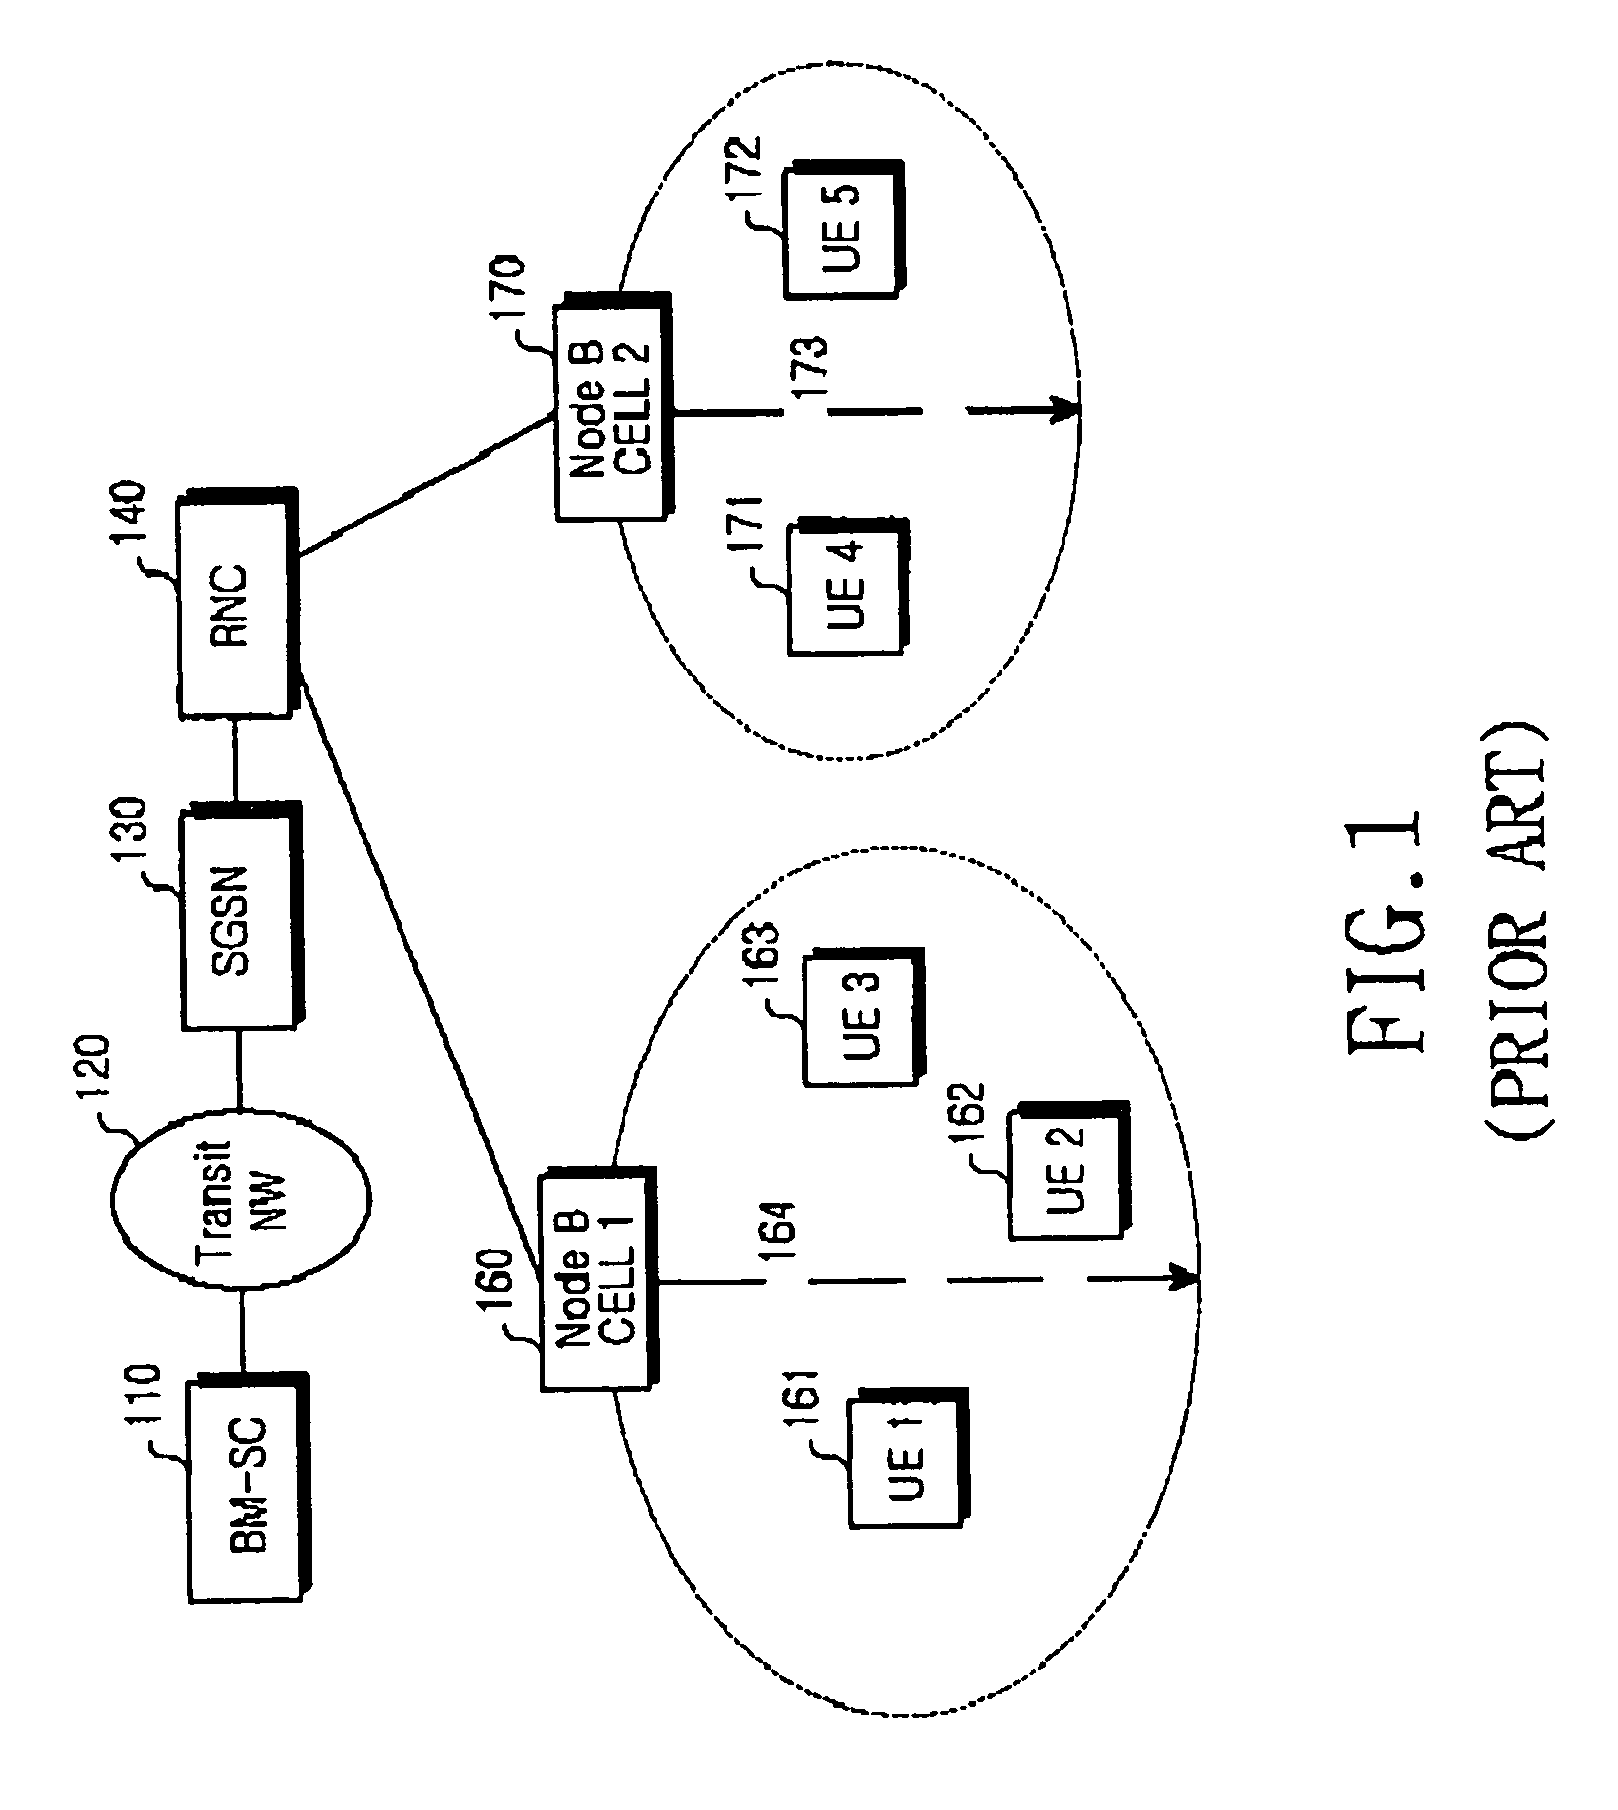 Method for cell reselection in an MBMS mobile communication system